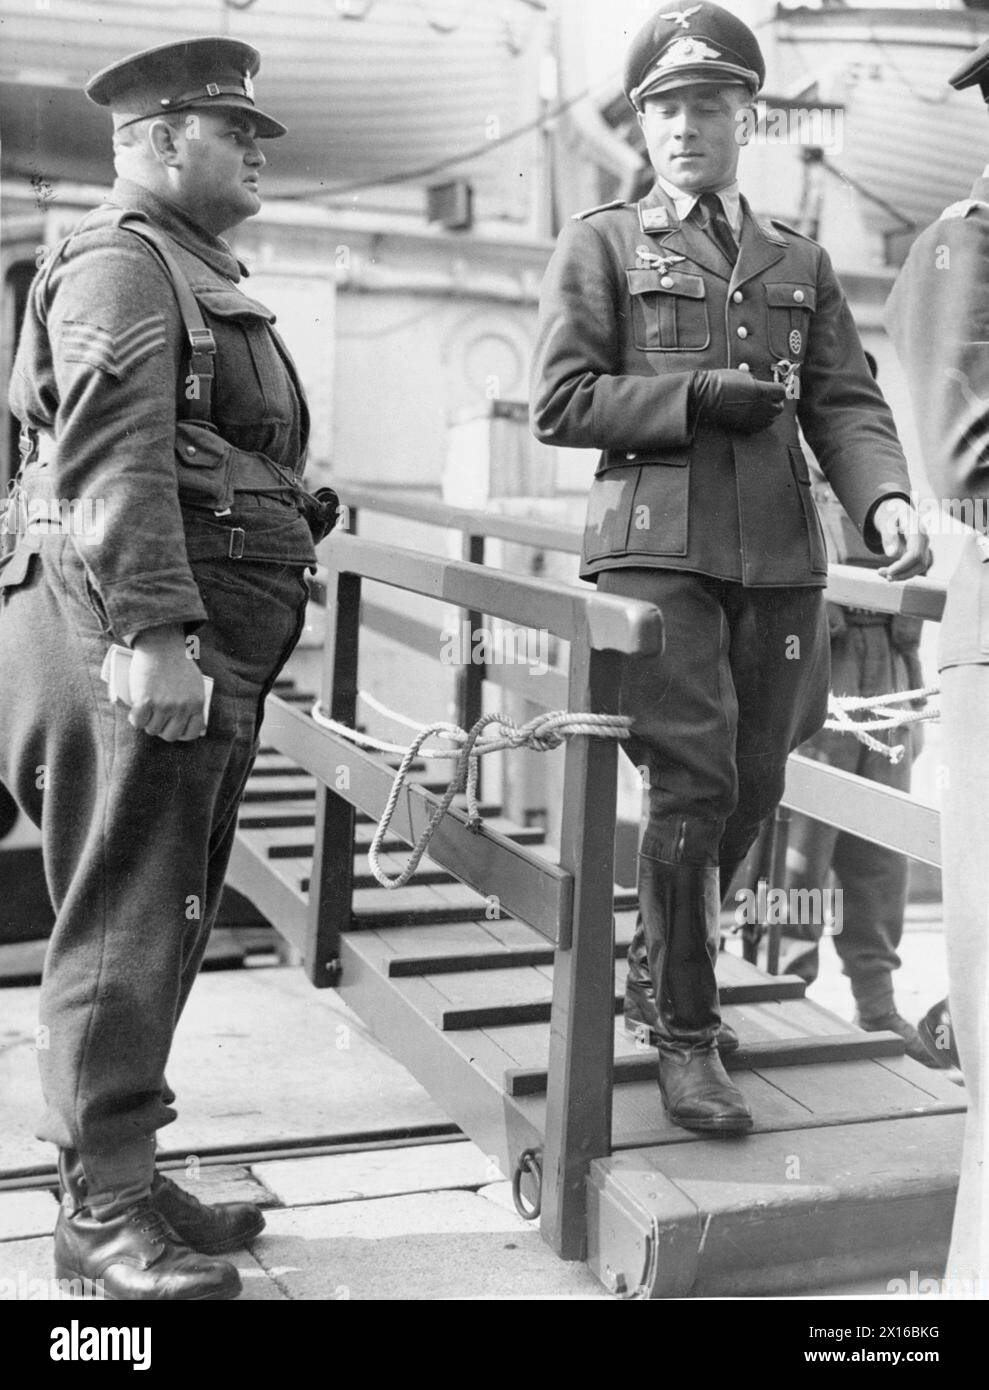 THE BRITISH ARMY IN THE UNITED KINGDOM 1939-45 - A Luftwaffe officer prisoner is escorted down the gangplank of a hospital ship to exercise on the quayside at Newhaven, 5 October 1941. He was one of a number of German POWs awaiting repatriation in a prisoner exchange Stock Photo